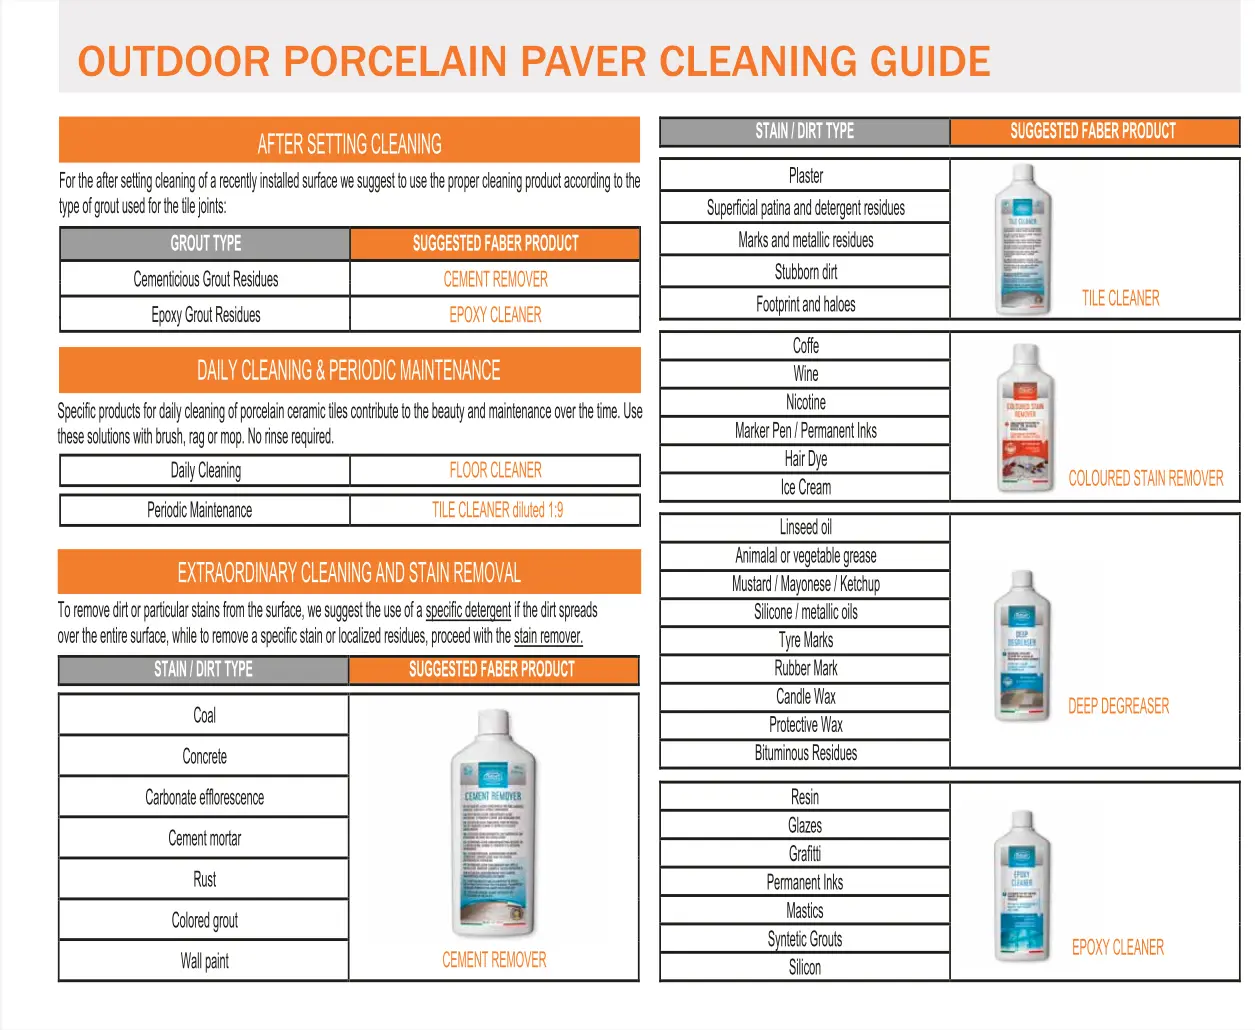 Porcelain Pavers DIY Methods for Maintaining and Cleaning